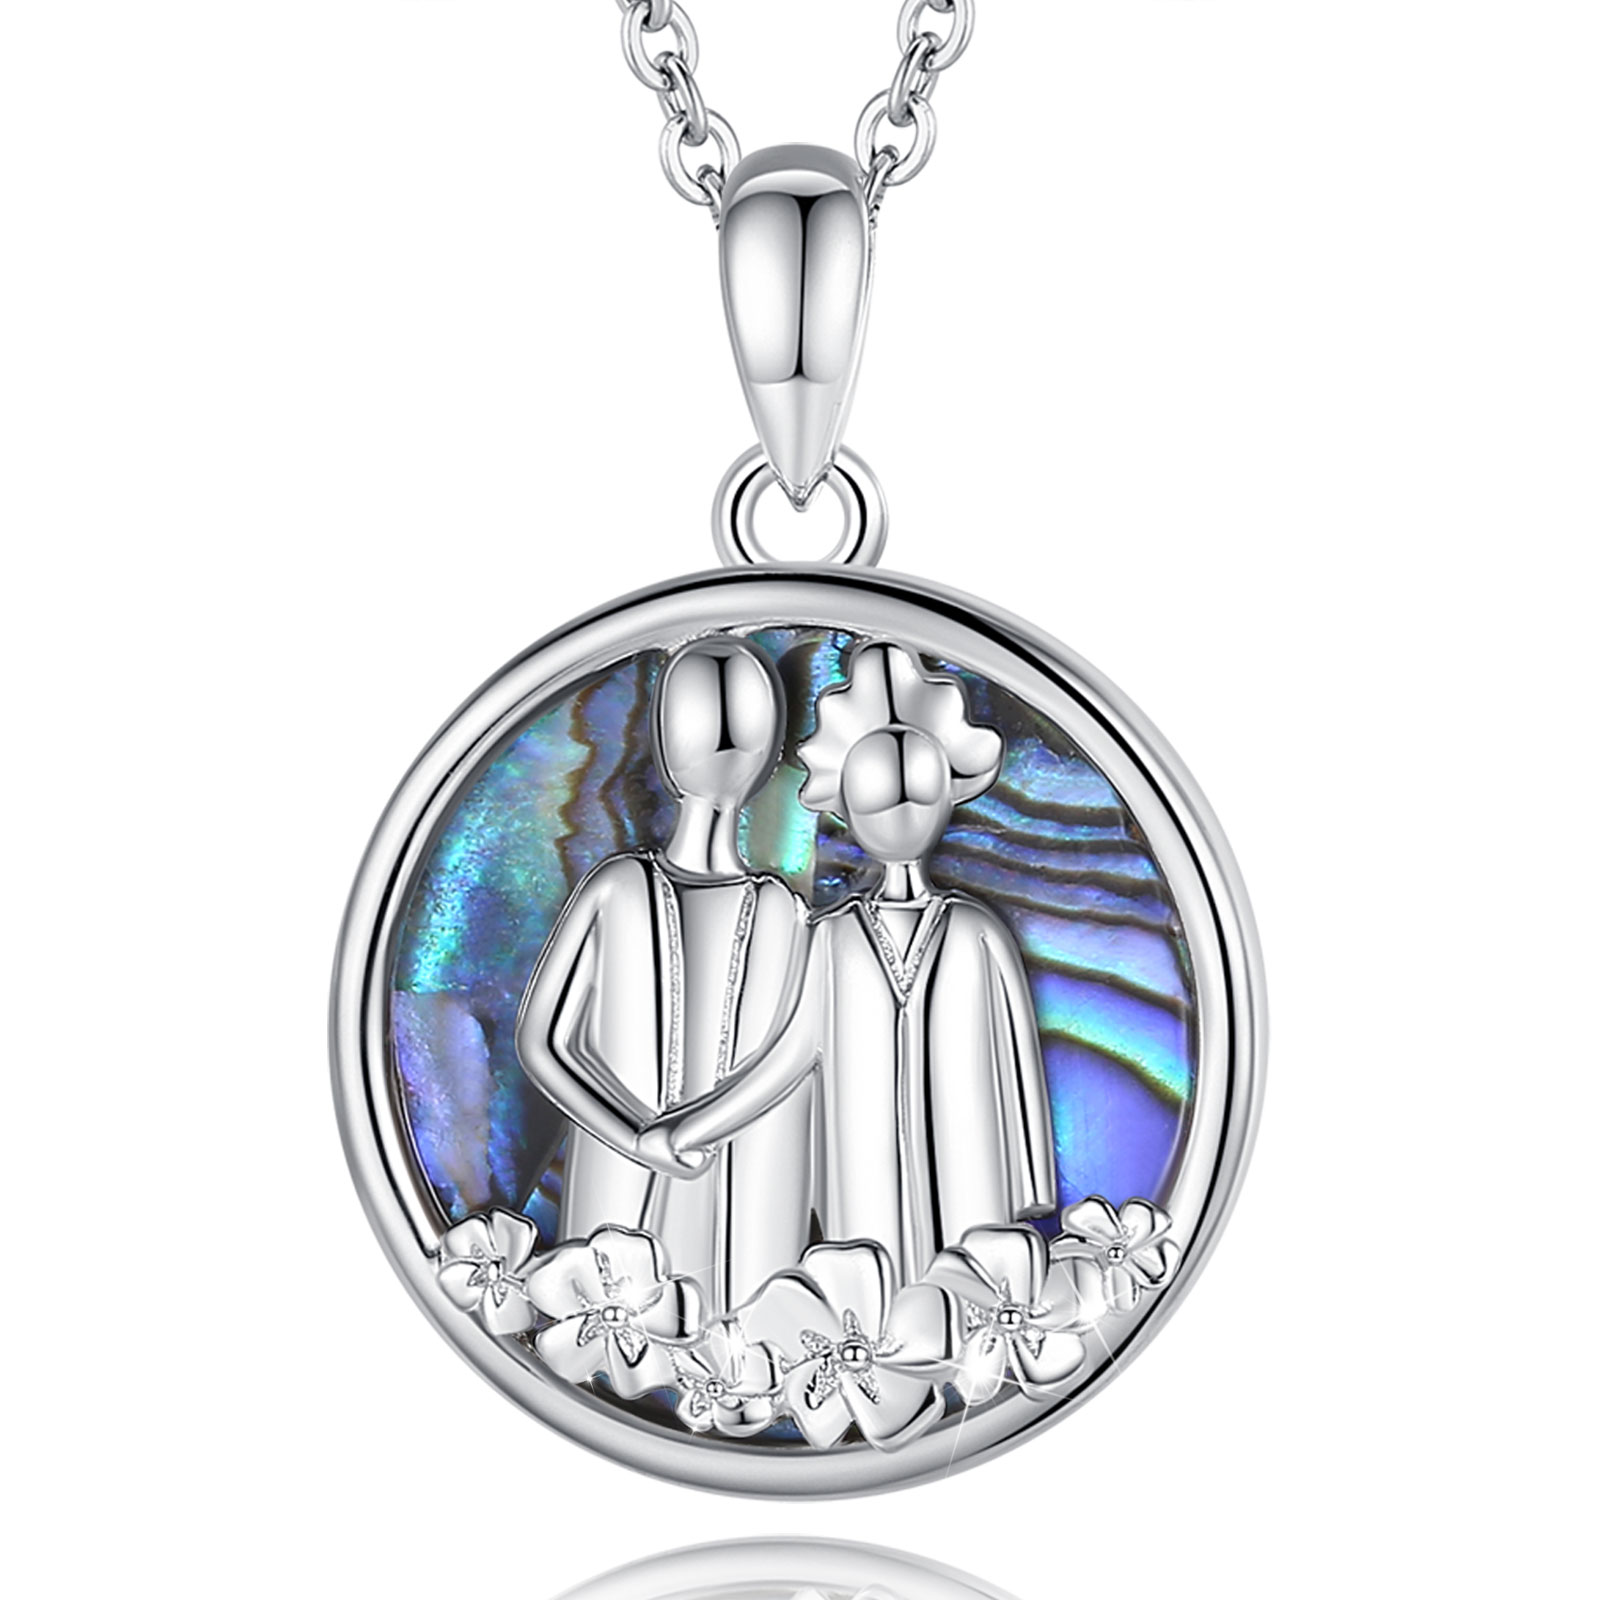 Merryshine Jewelry Colorful Abalone Shell Mother of Pearl 925 Sterling Silver Charm Necklace